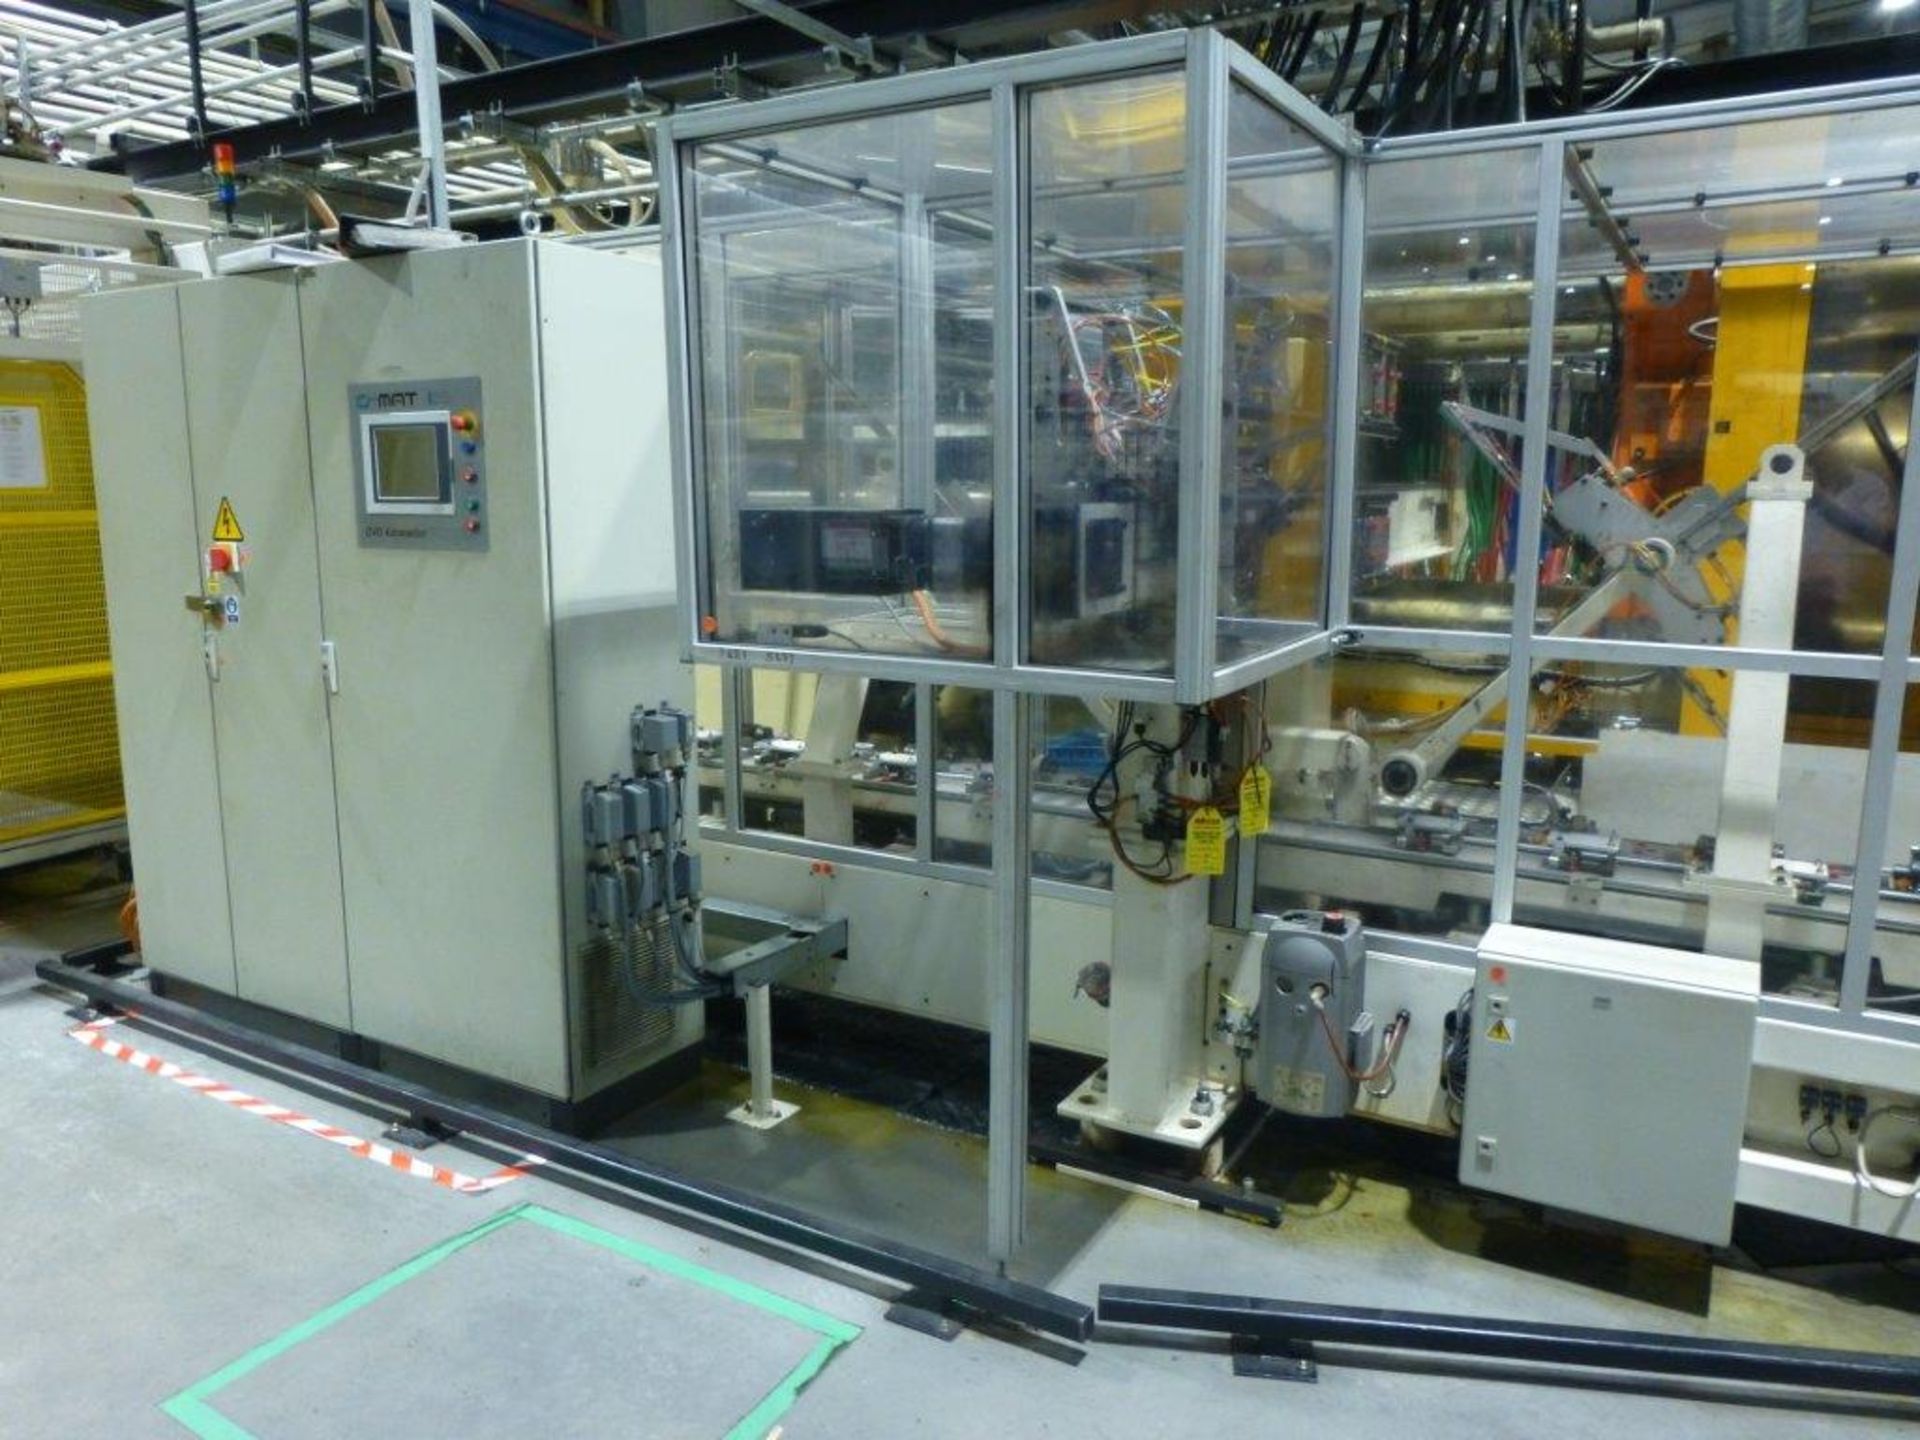 GMAT M111 DVD Automation traversing Beam take-off Robot, serial No P178 (2005) with dual 8 Case - Image 2 of 6